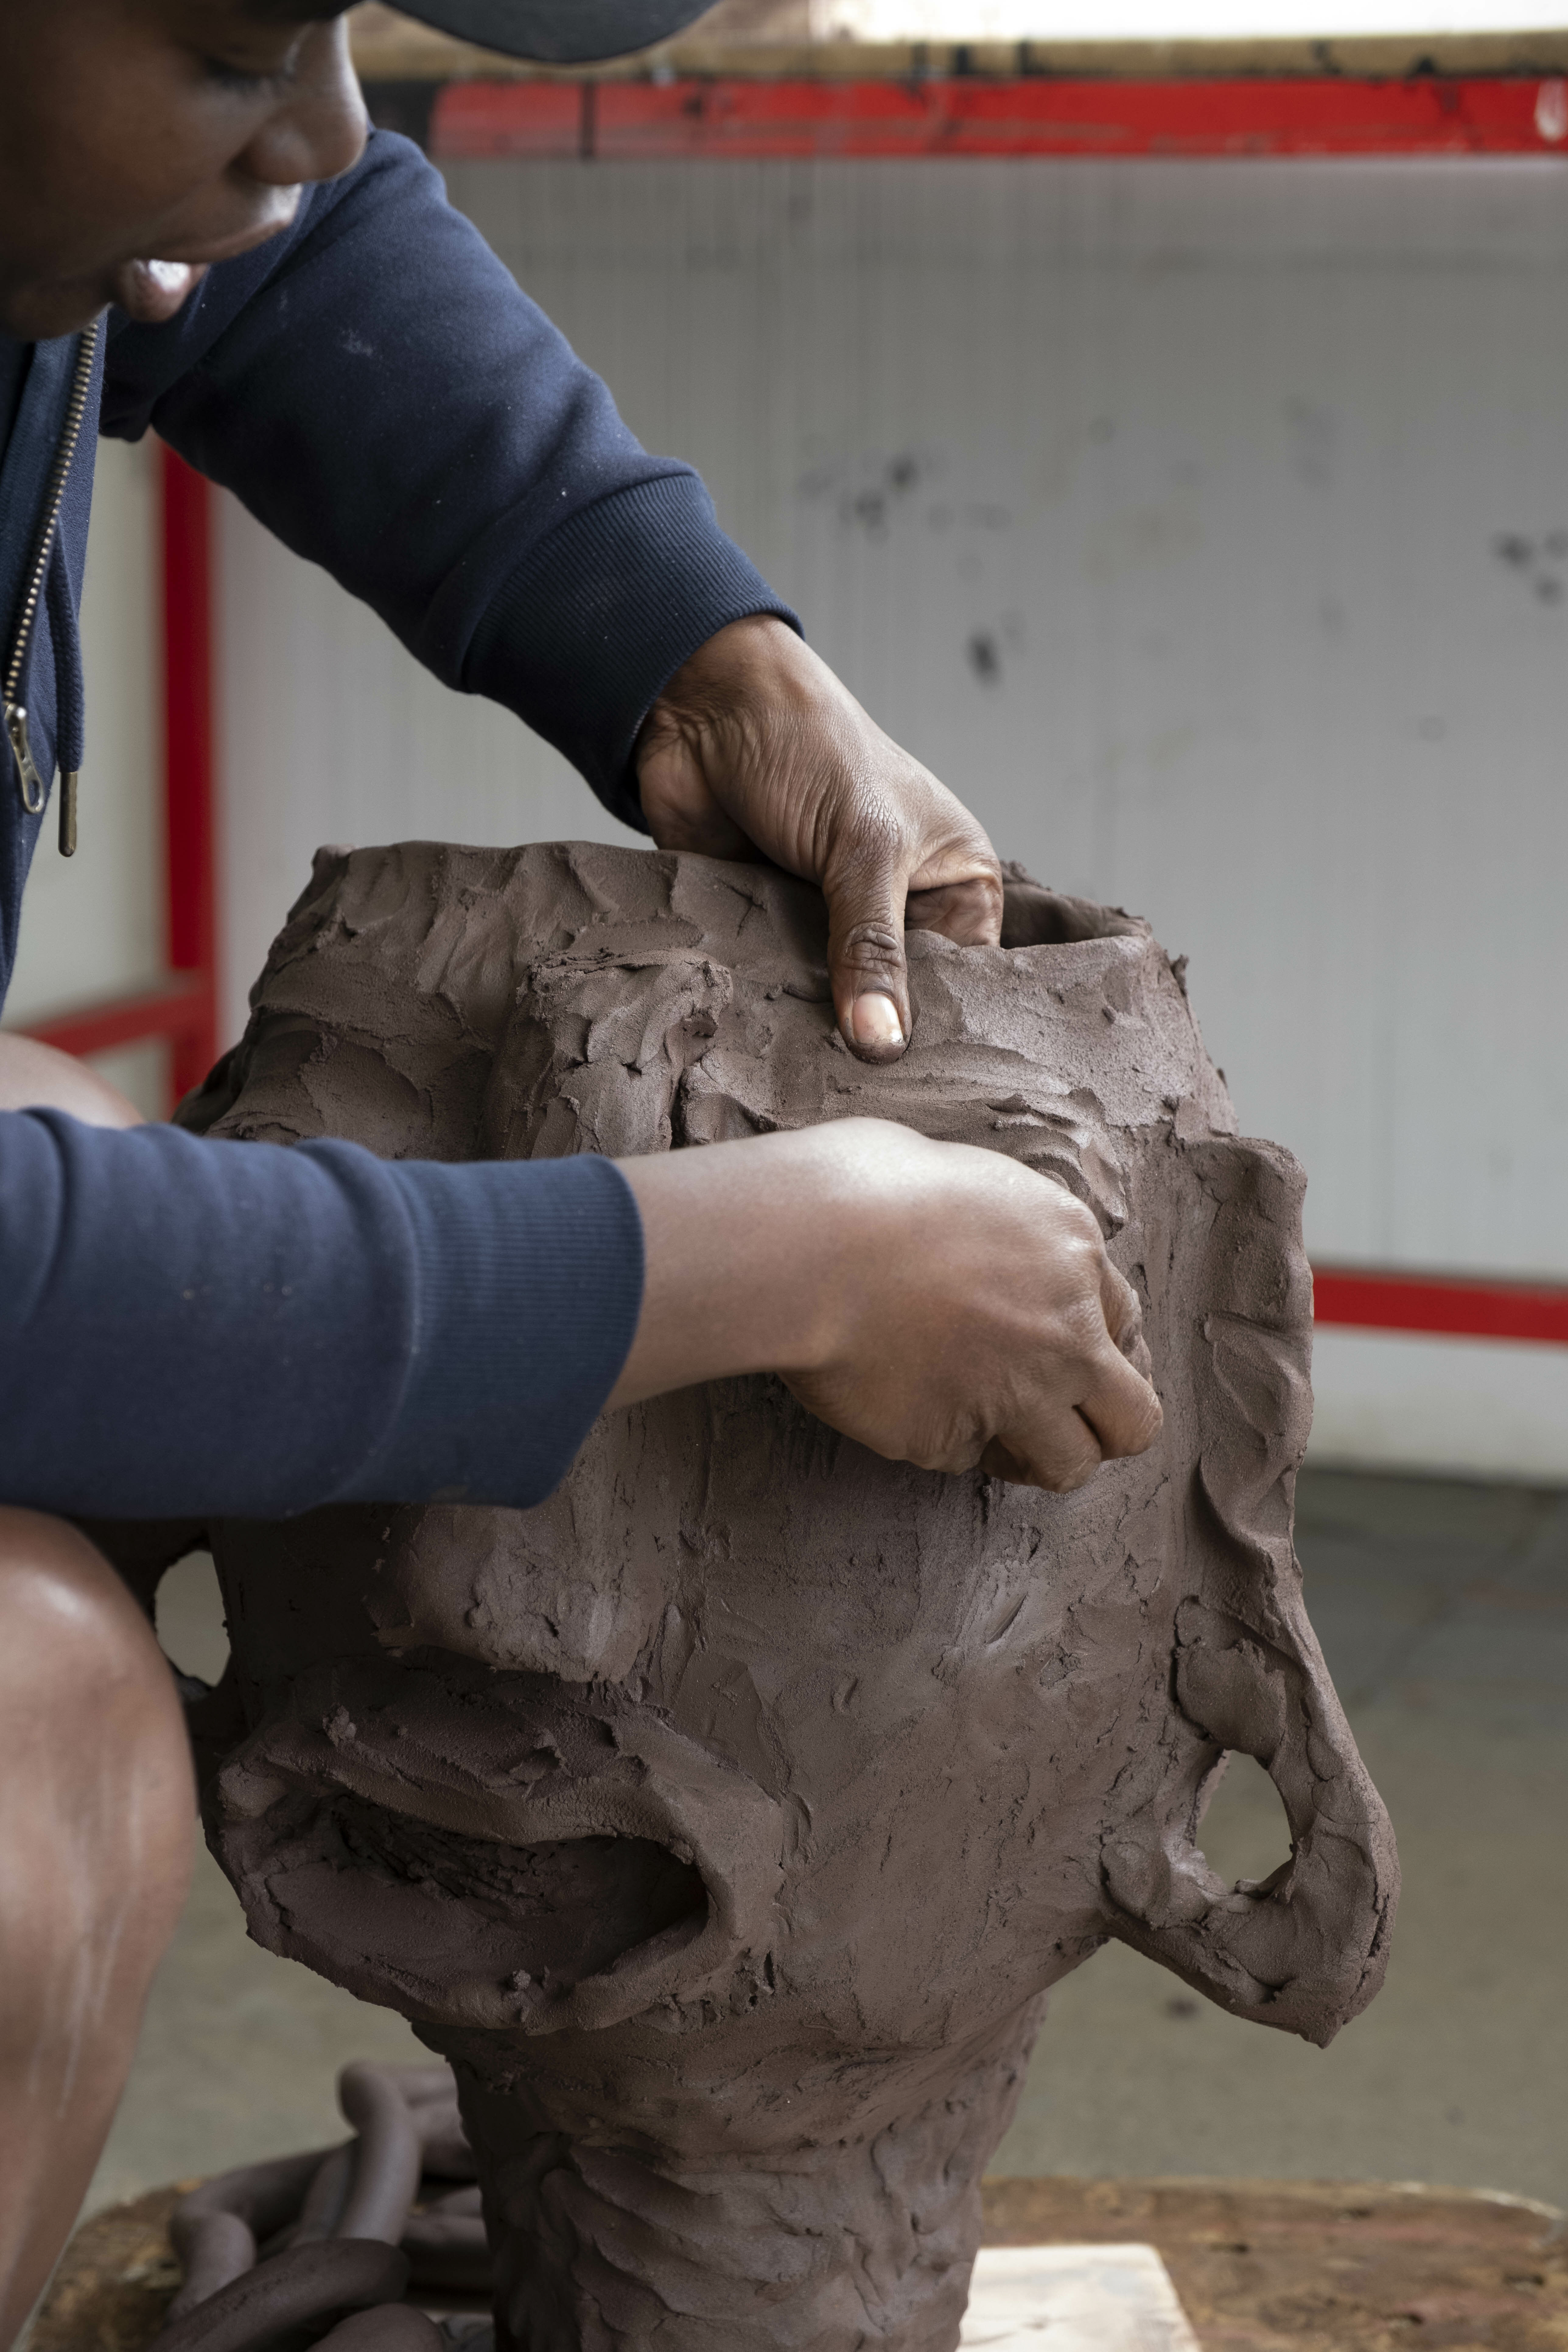 A black woman wearing shorts and a sweatshirt, working on a clay head sculpture